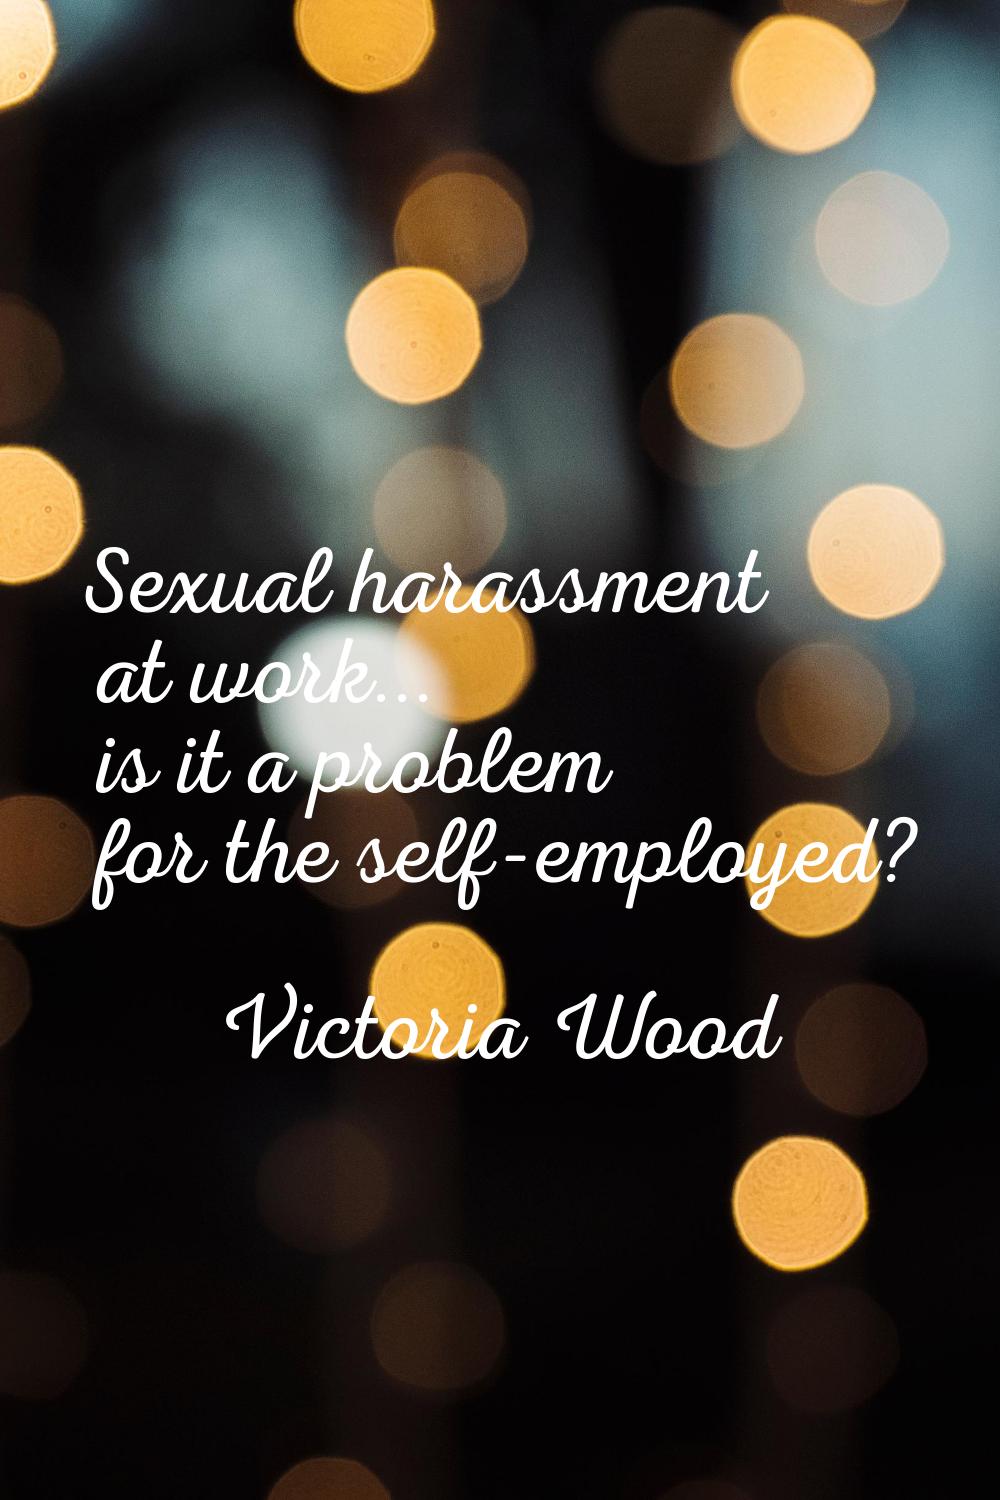 Sexual harassment at work... is it a problem for the self-employed?